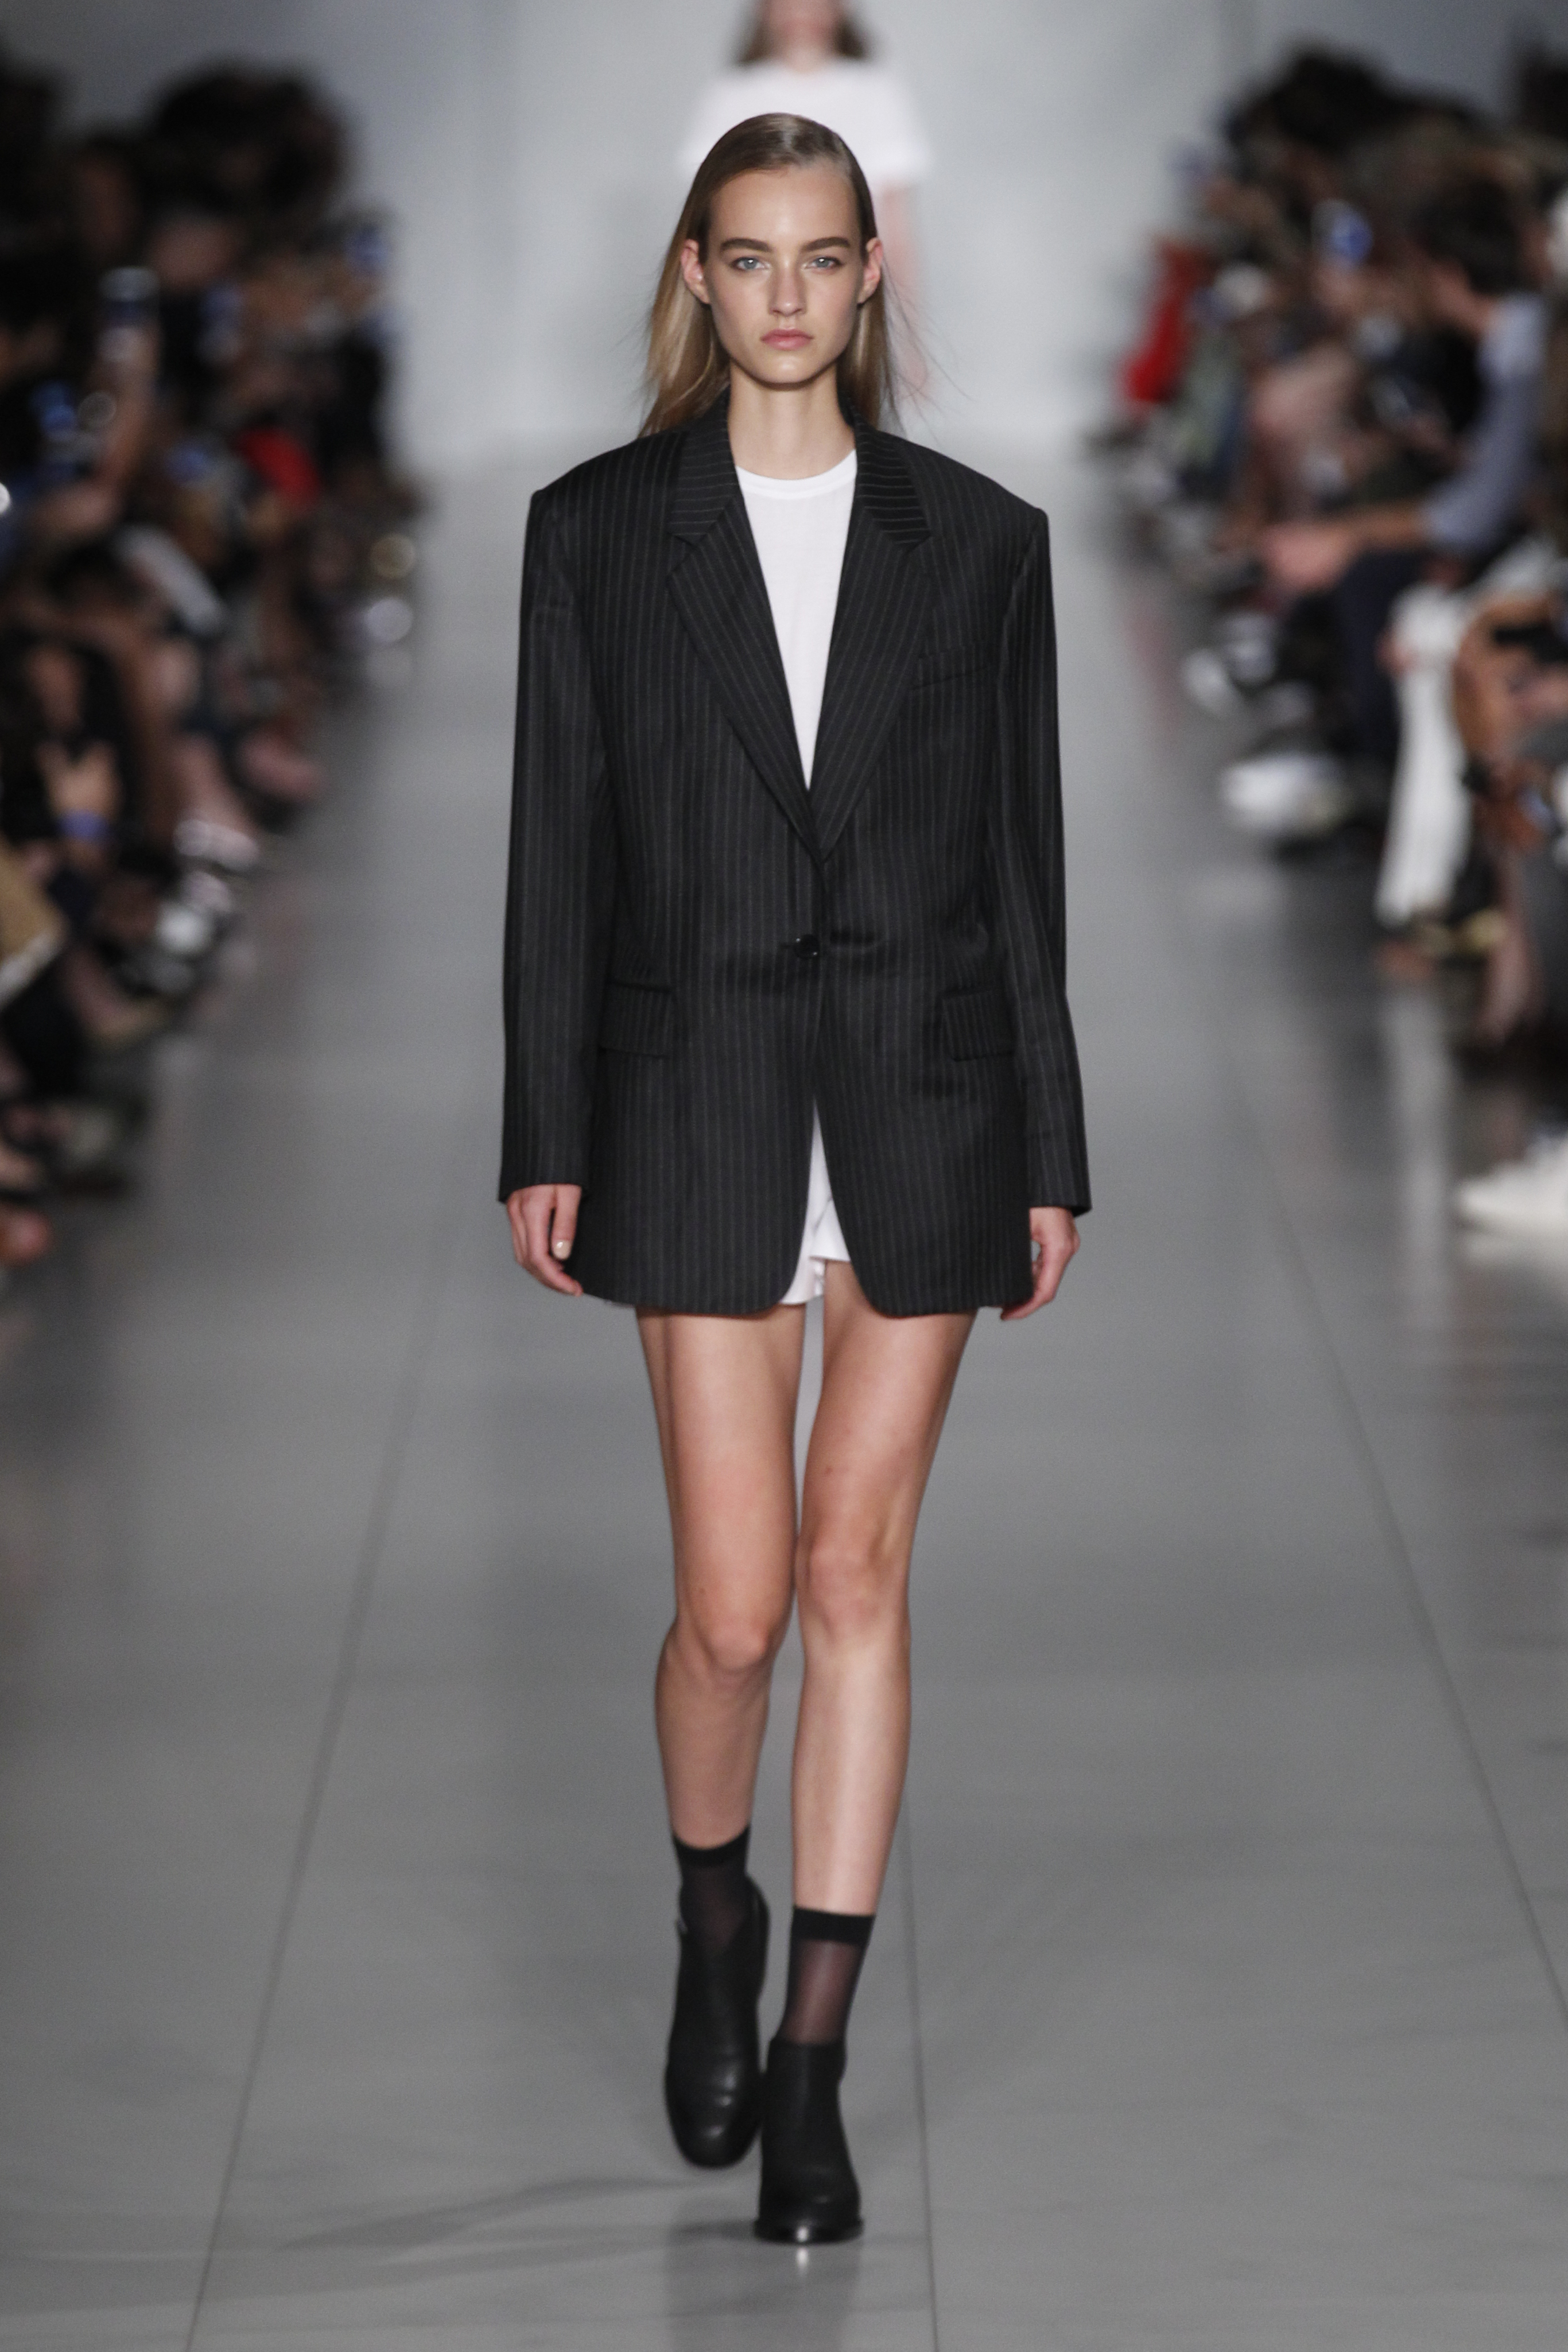 DKNY By Donna Karan Is Cool New Yorker For Spring 2013 At New York Fashion  Week [PHOTOS]